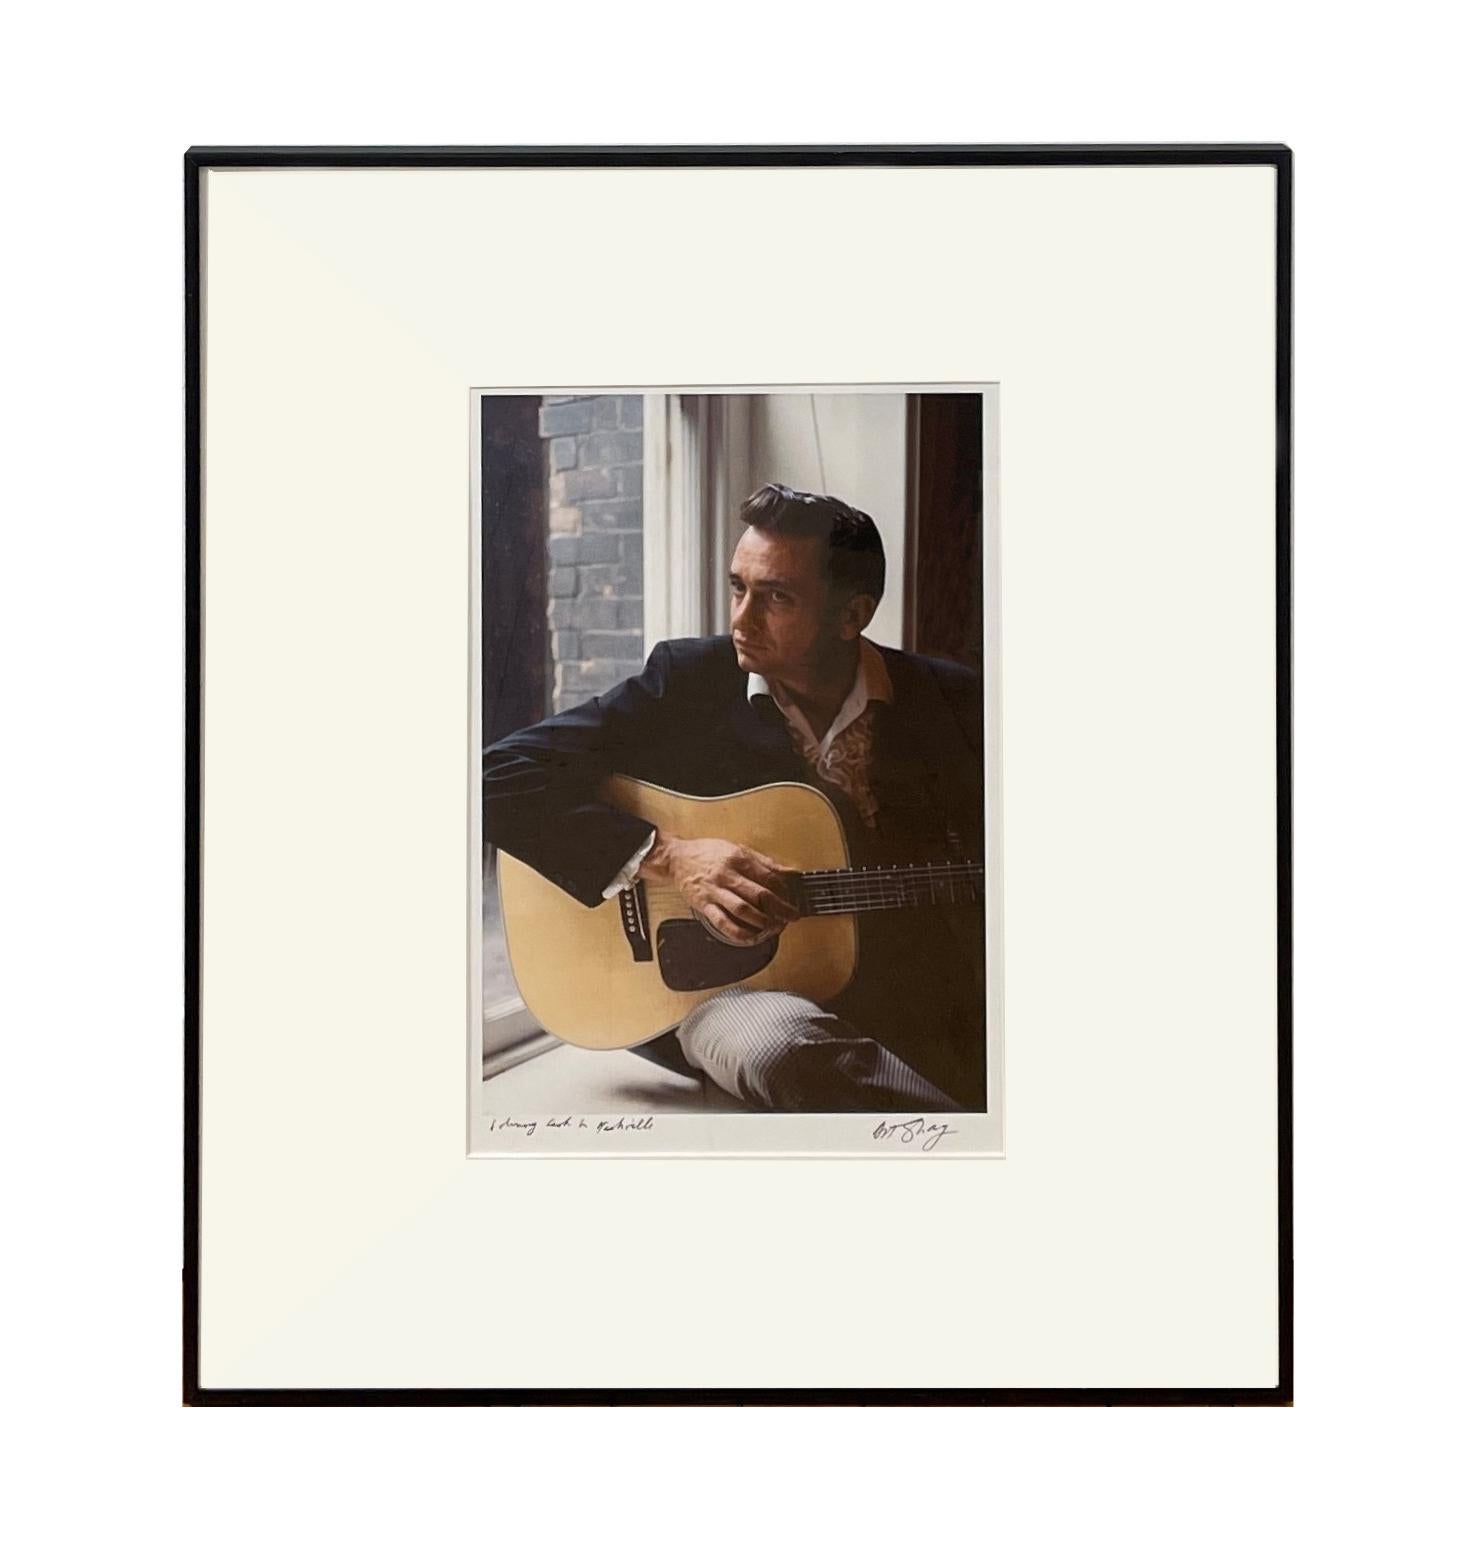 Art Shay Portrait Photograph - Thirty Seconds with Johnny Cash, Nashville 1961 - Color Archival Print, Framed